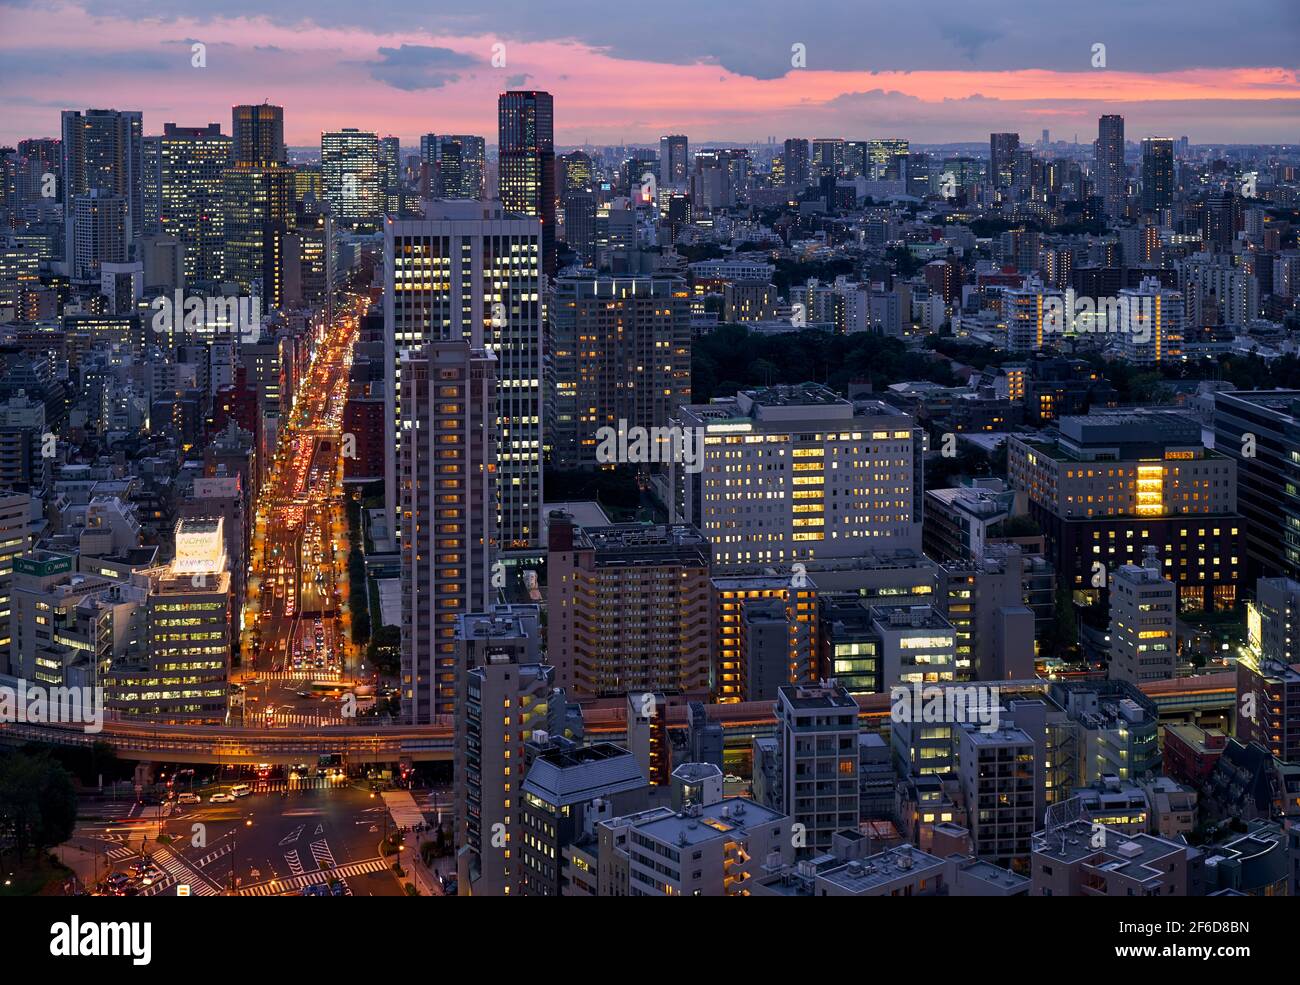 Tokyo, Japan - October 23, 2019: The view of the skyscrapers center of Minato city with the bright lights of Sakurada-dori avenue from the Tokyo Tower Stock Photo